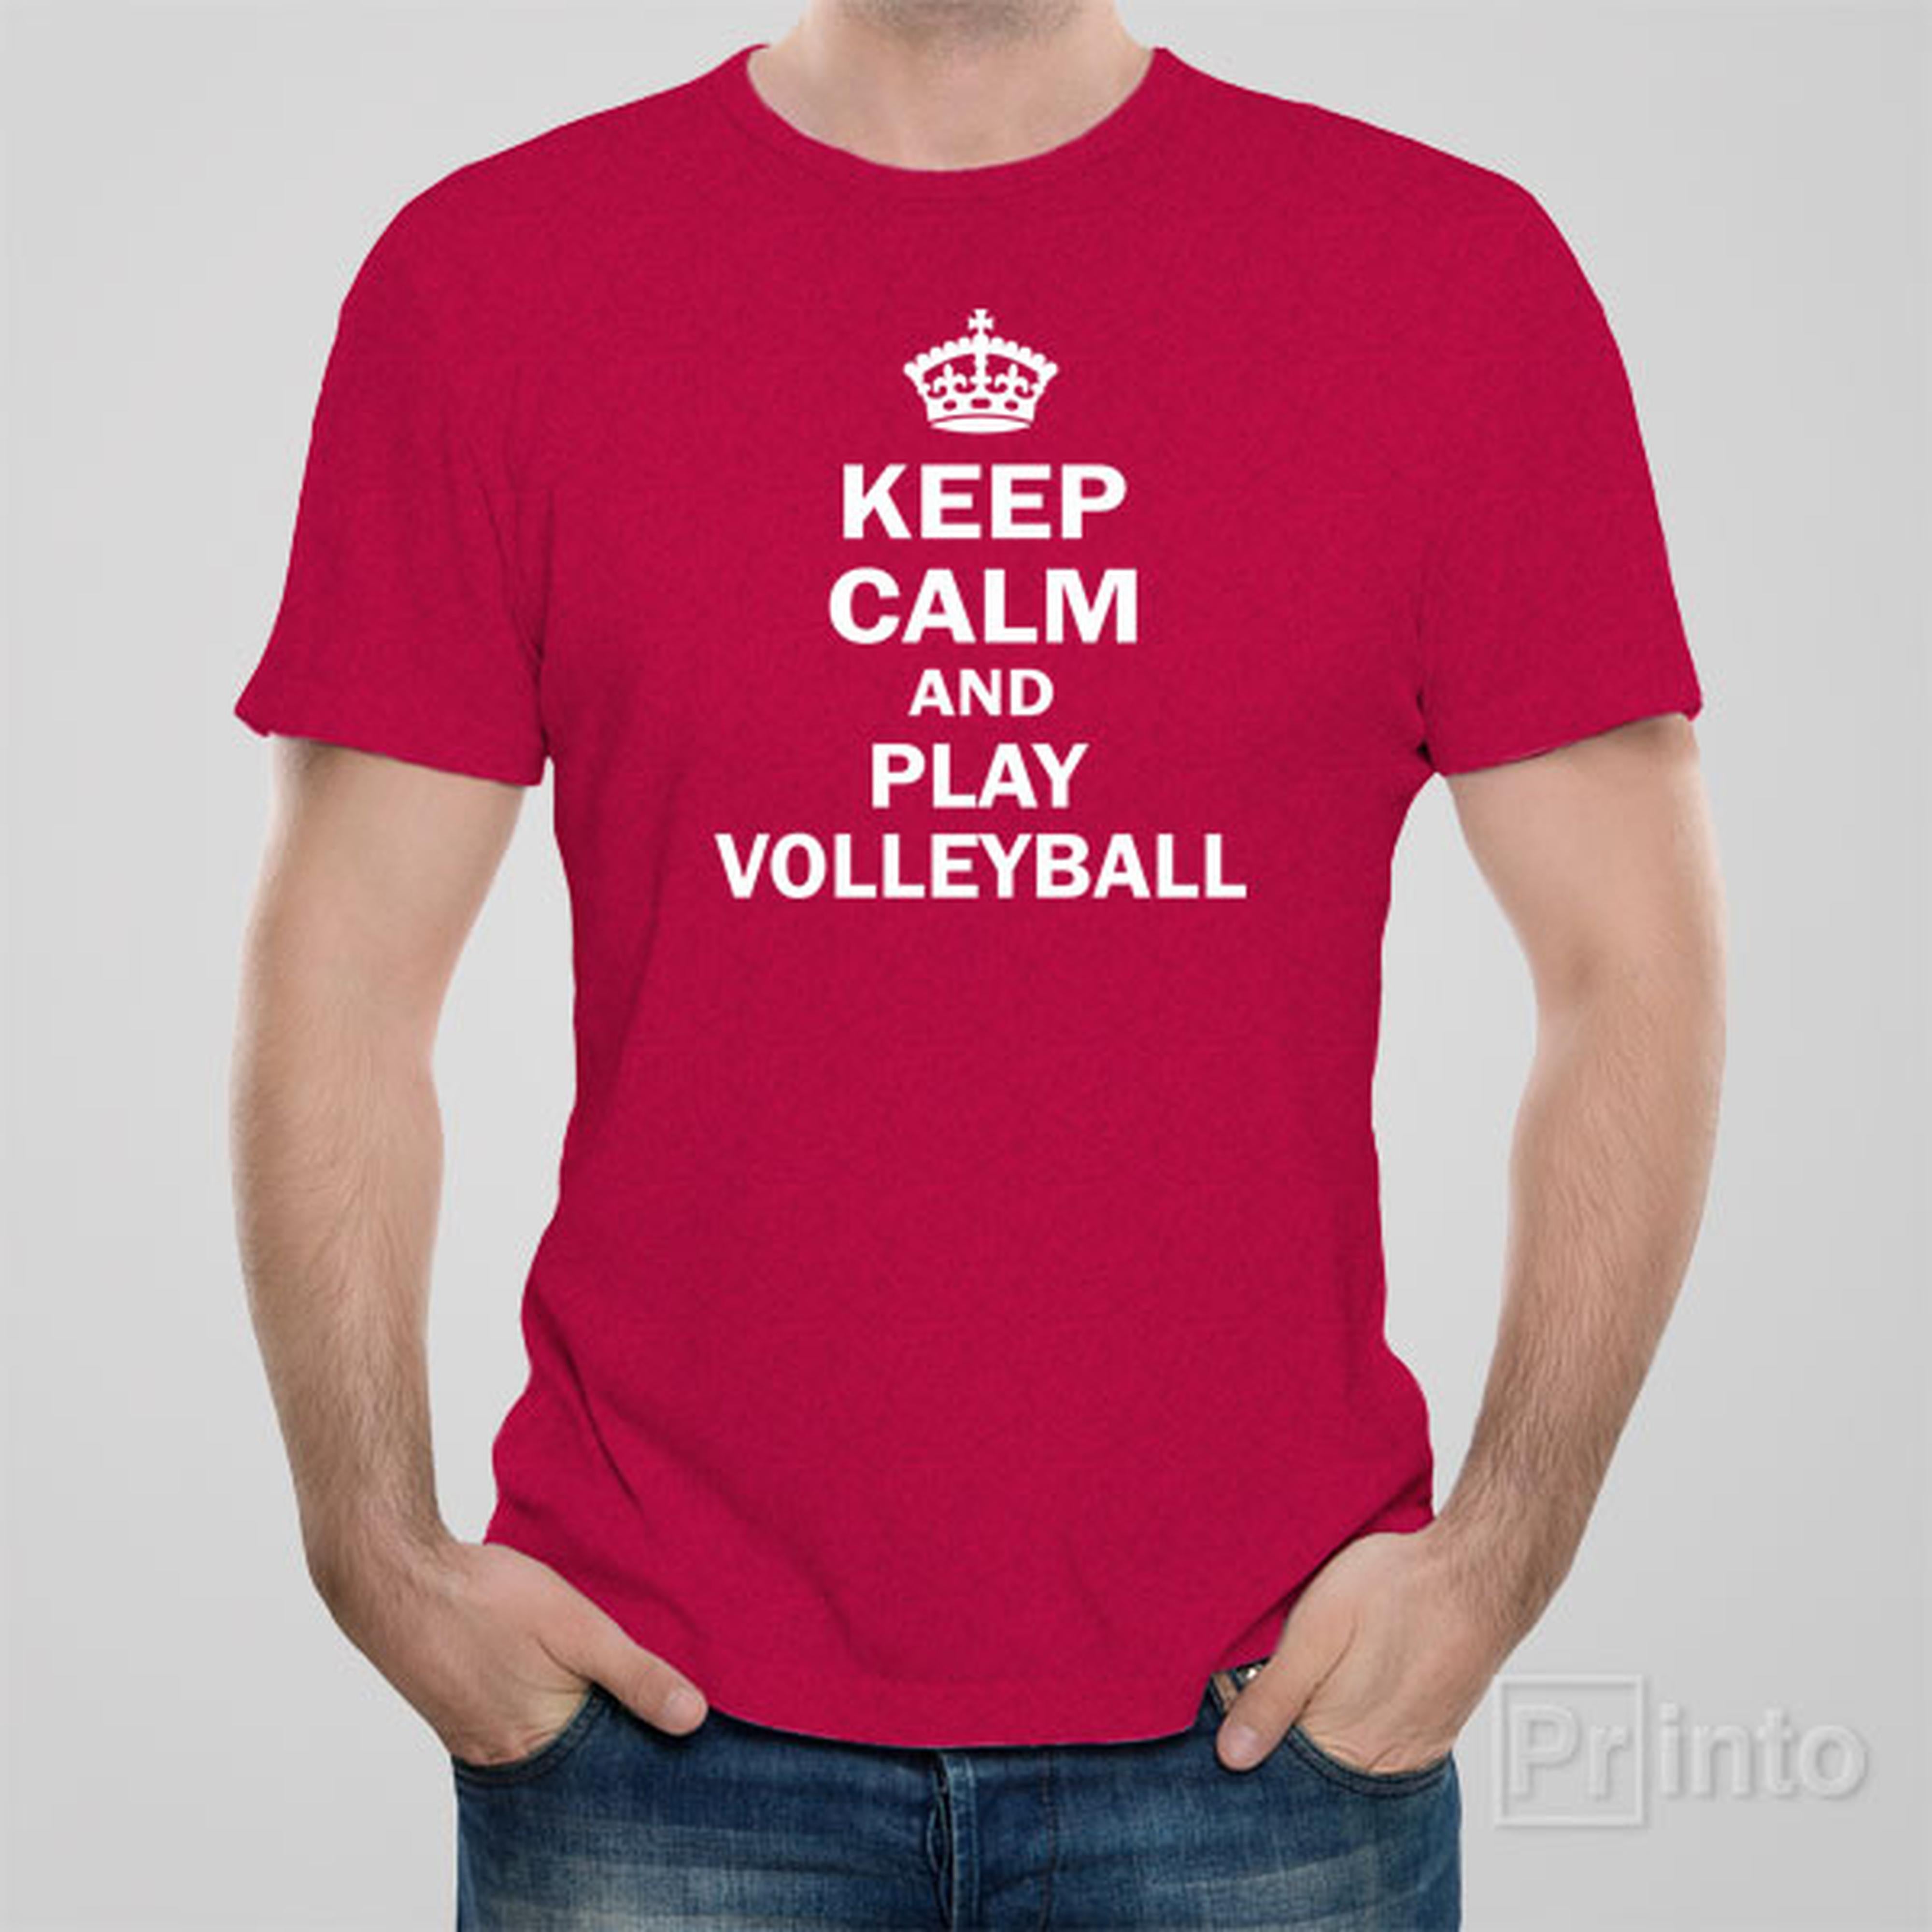 keep-calm-and-play-volleyball-t-shirt